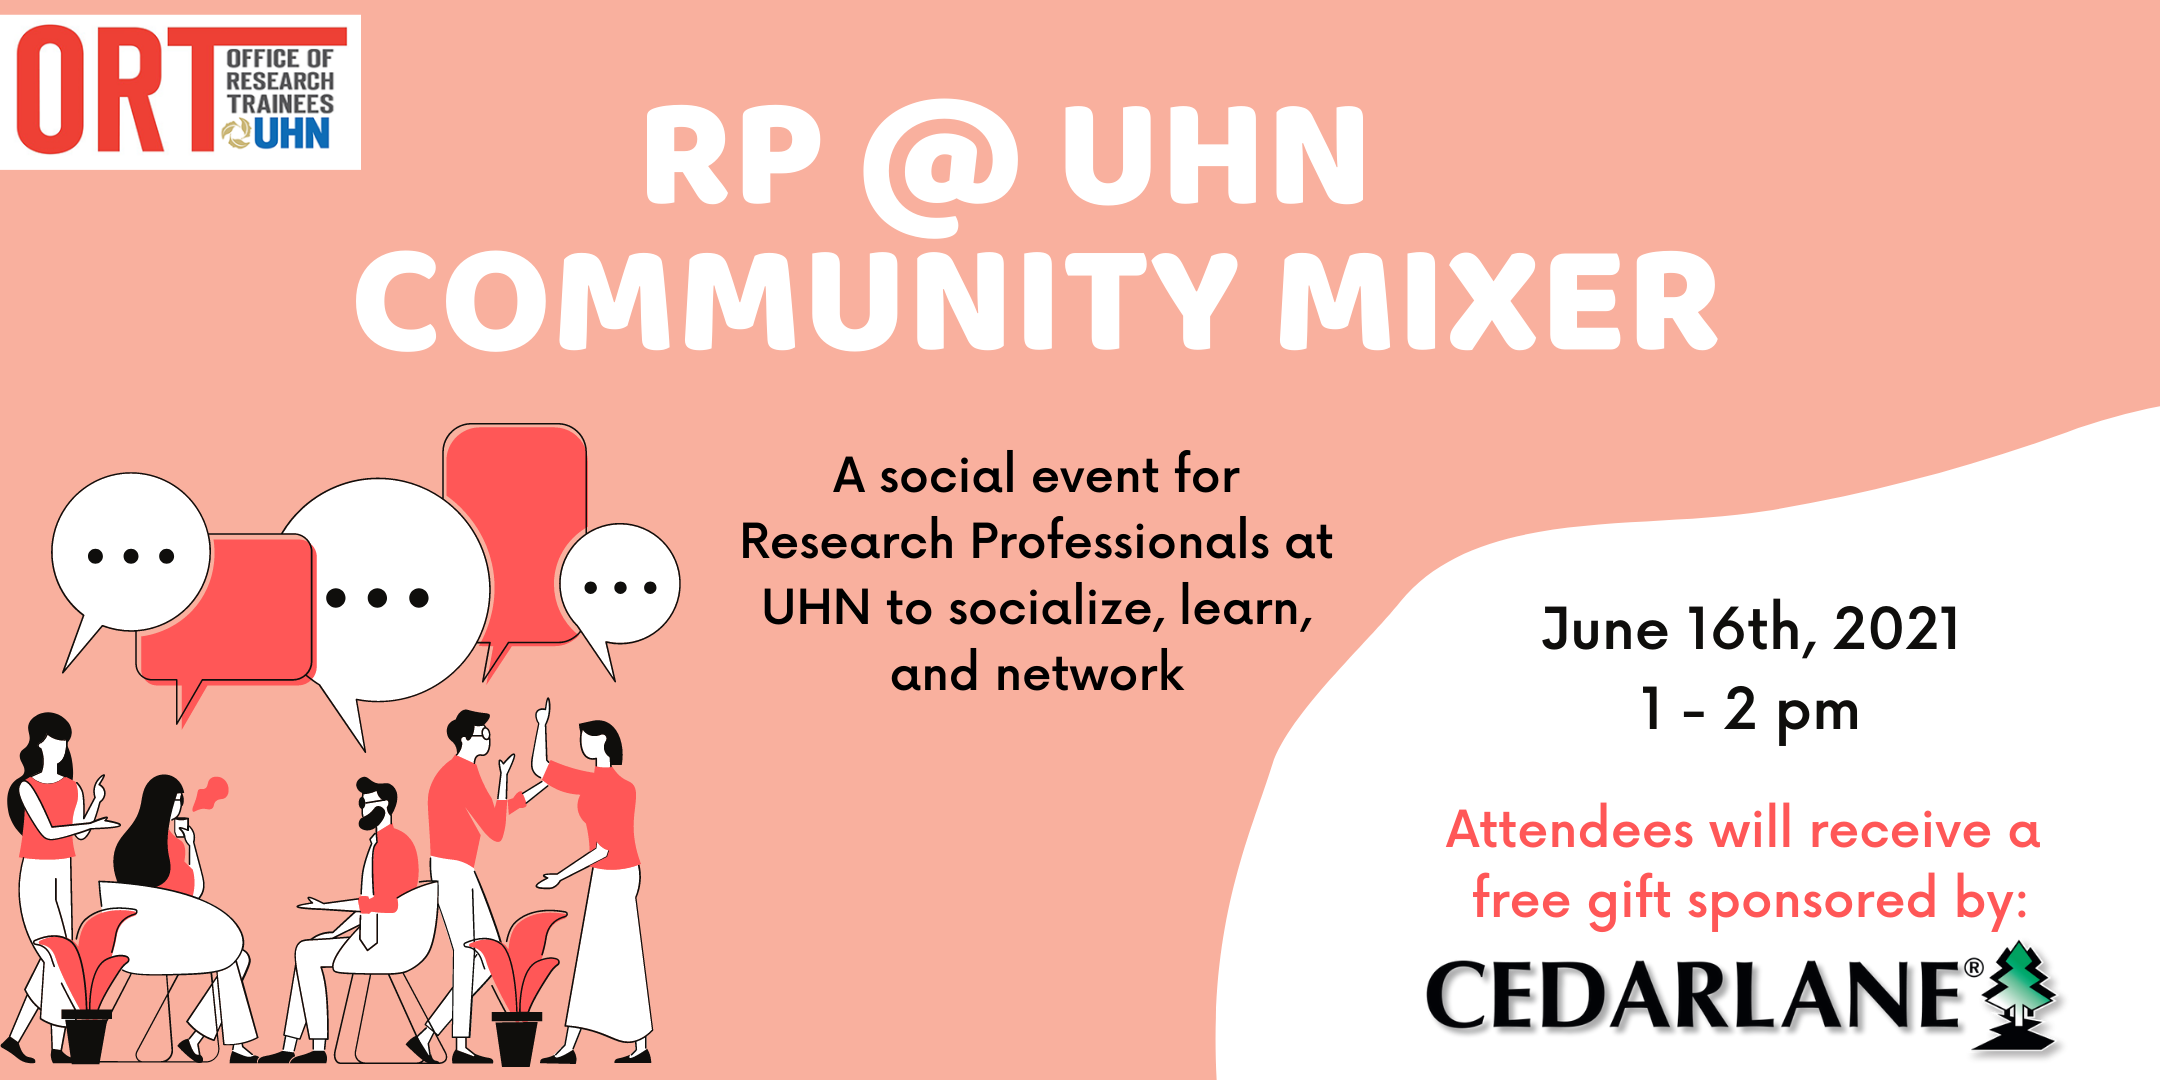 Event poster on a peach background with white and black writing. The poster says RP @ UHN Community Mixer, a social event for Research Professionals at UHN to socialize, learn and network. June 16th, 2021, 1- 2 pm. Attendees will receive a free gift sponsored by Cederlane. On the bottom left is a clipart image of many people having a conversation.